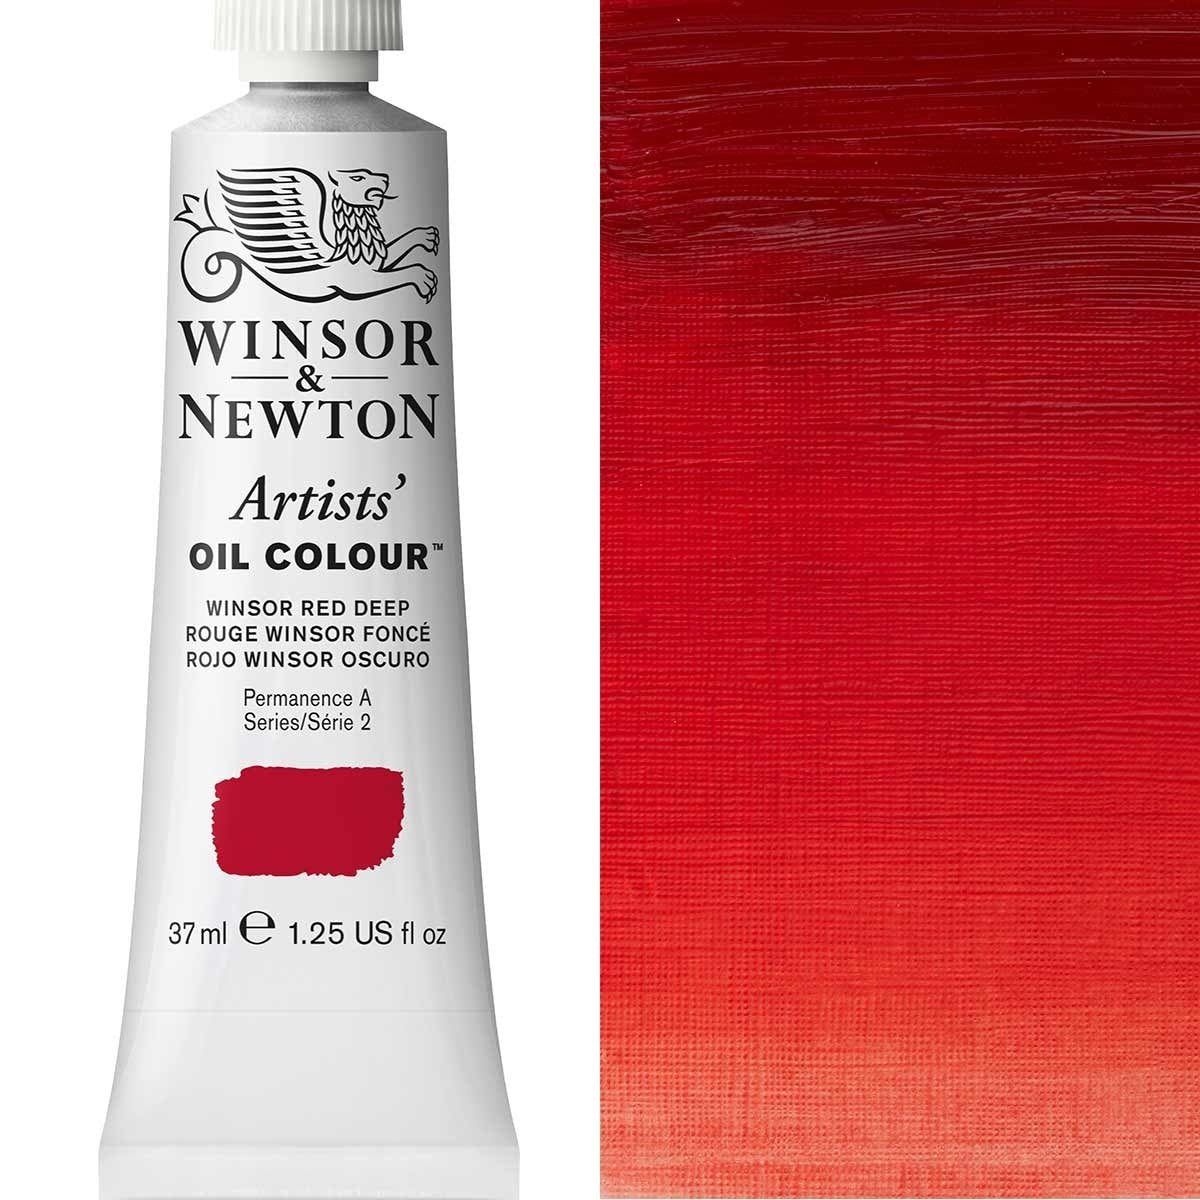 Winsor and Newton - Artists 'Oil Color - 37ml - Winsor Red Deep